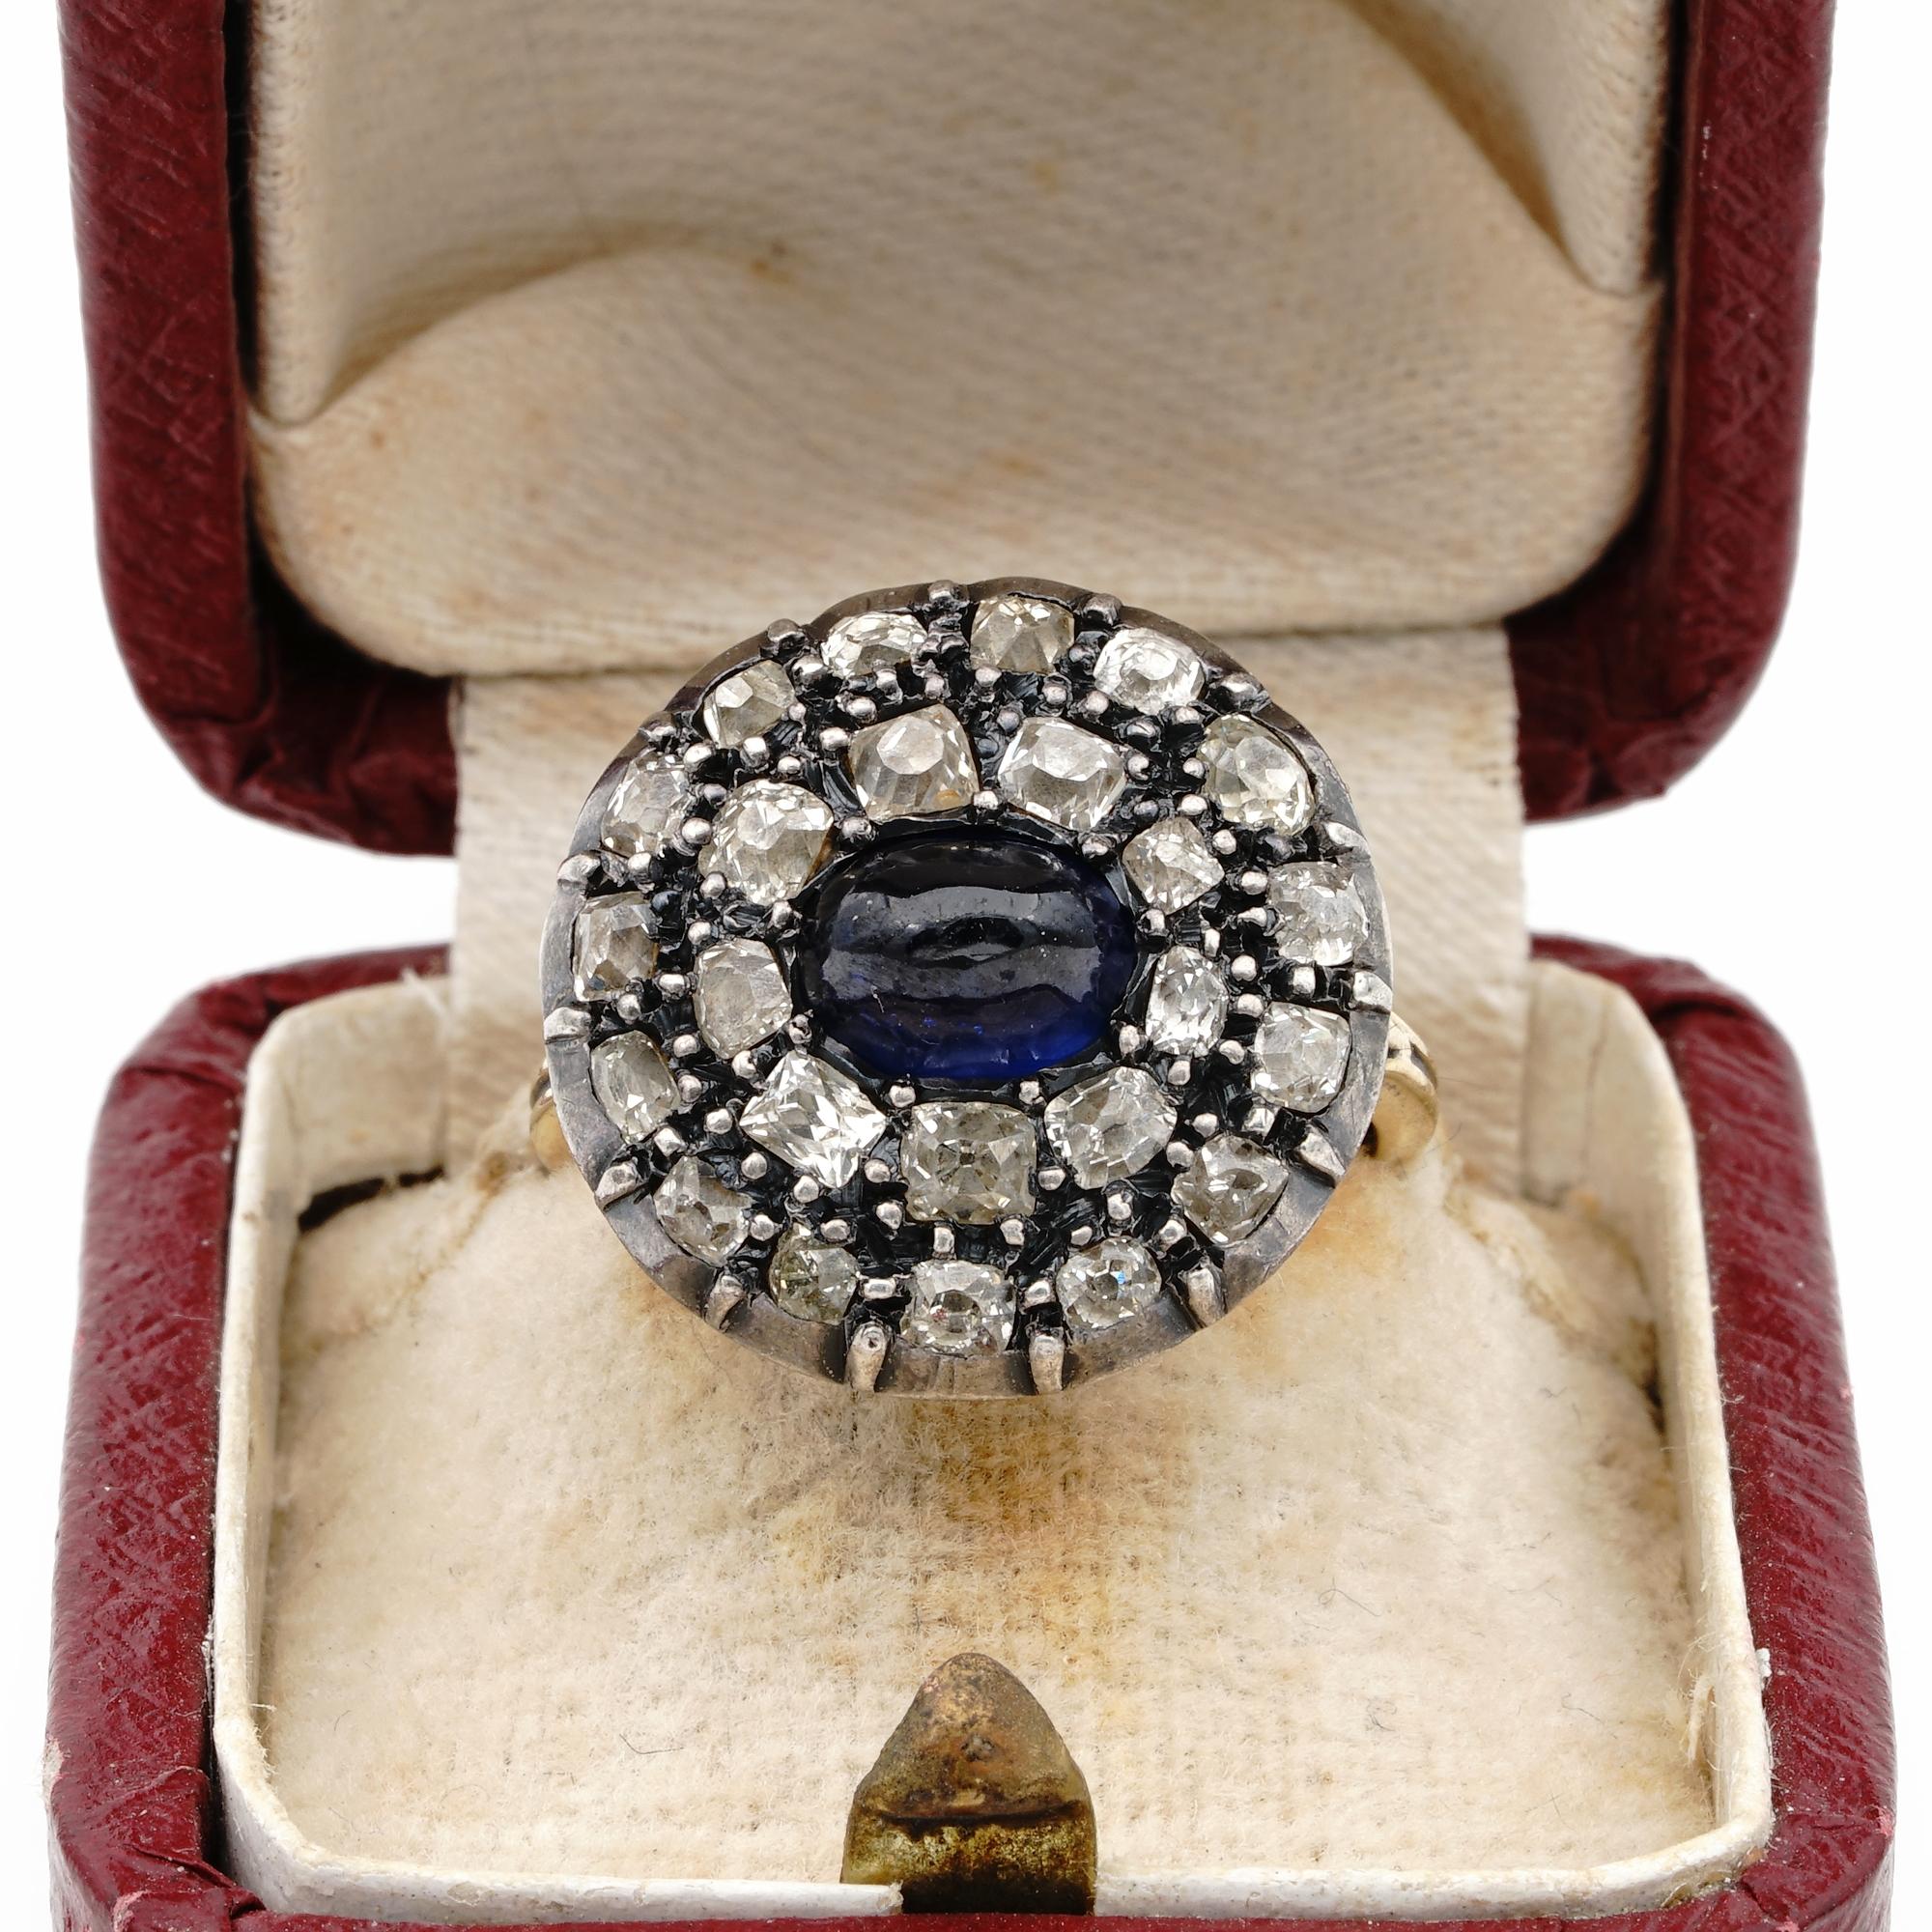 This beautiful Georgian ring is 1790 ca.
Made of 18 Kt gold with silver potions
Round head overwhelmed by antique Flemish cut Diamonds for a total estimate of 2.40 Ct full of sparkle surrounding a centre natural Sapphire of approx cabochon cut of